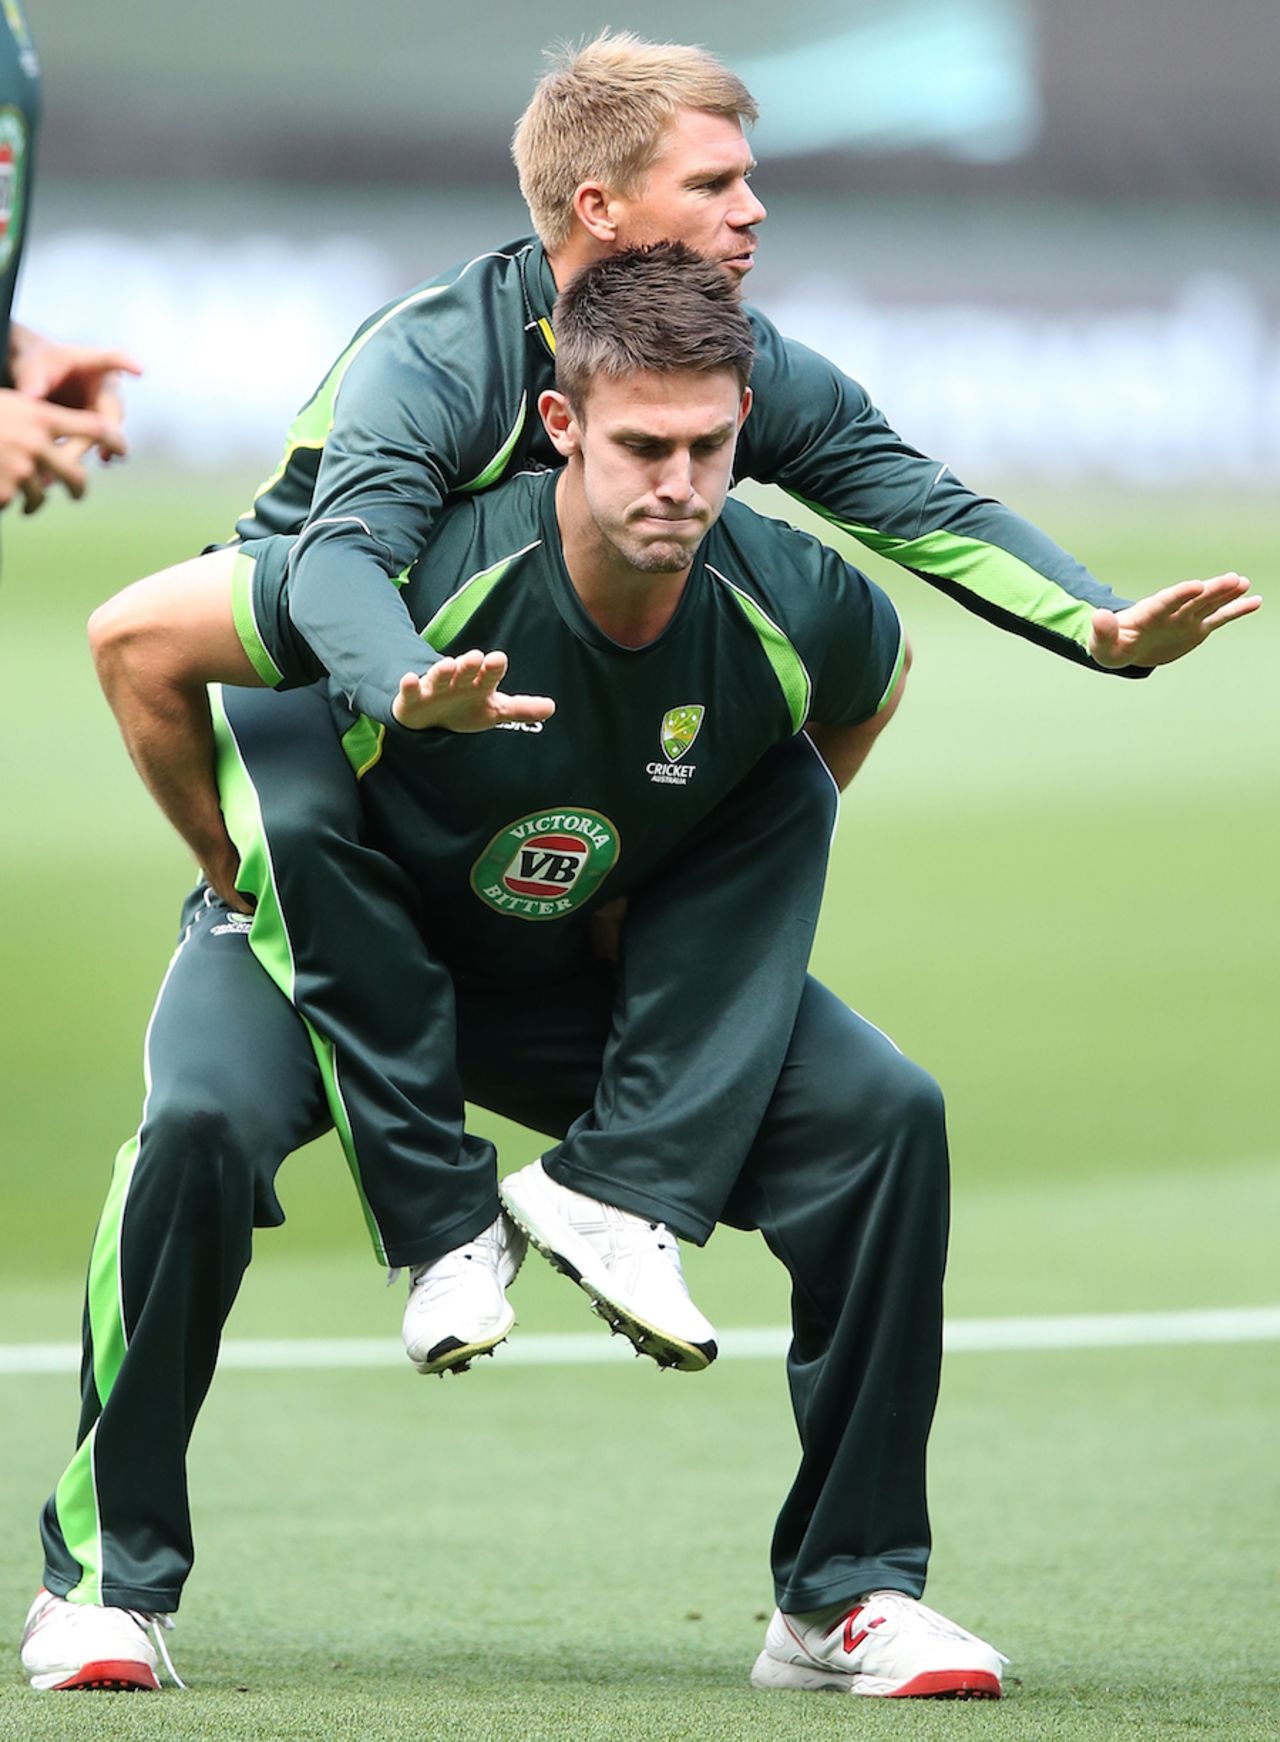 I got your back: David Warner gets a piggy back from Mitchell Marsh, World Cup 2015, Melbourne, March 28, 2015